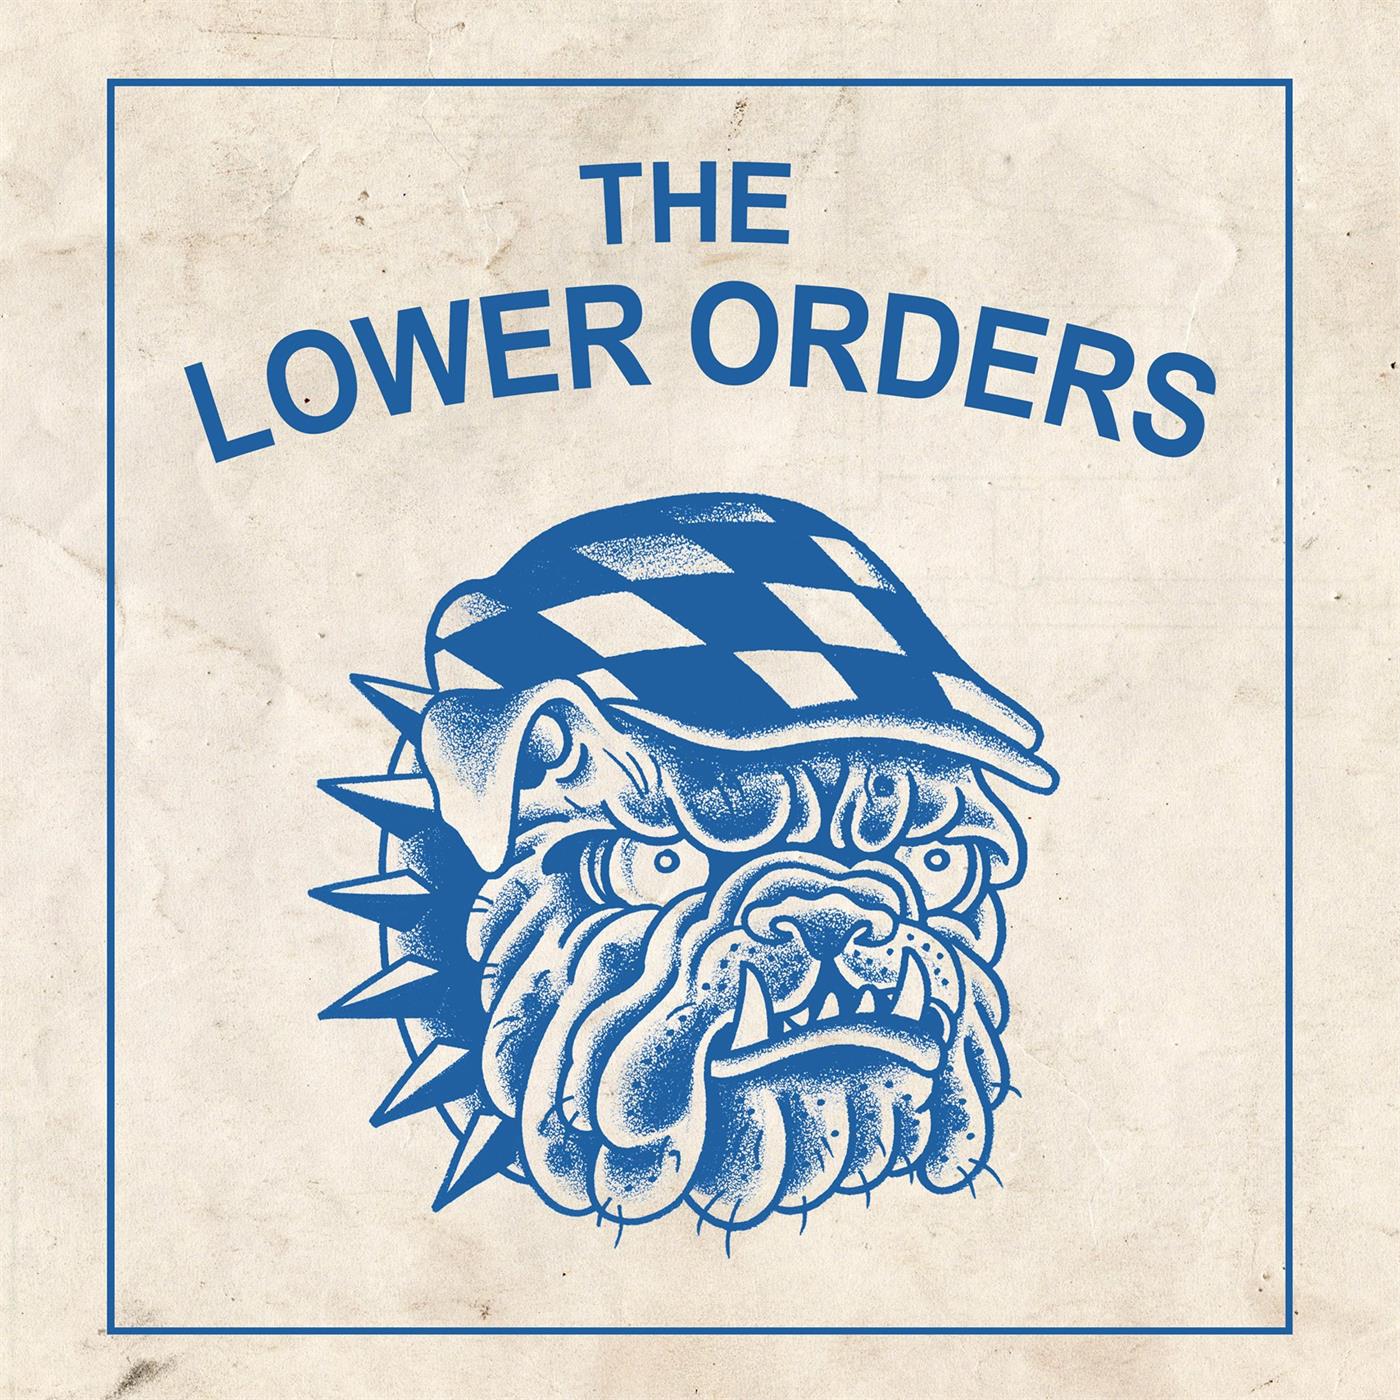 The Lower Orders